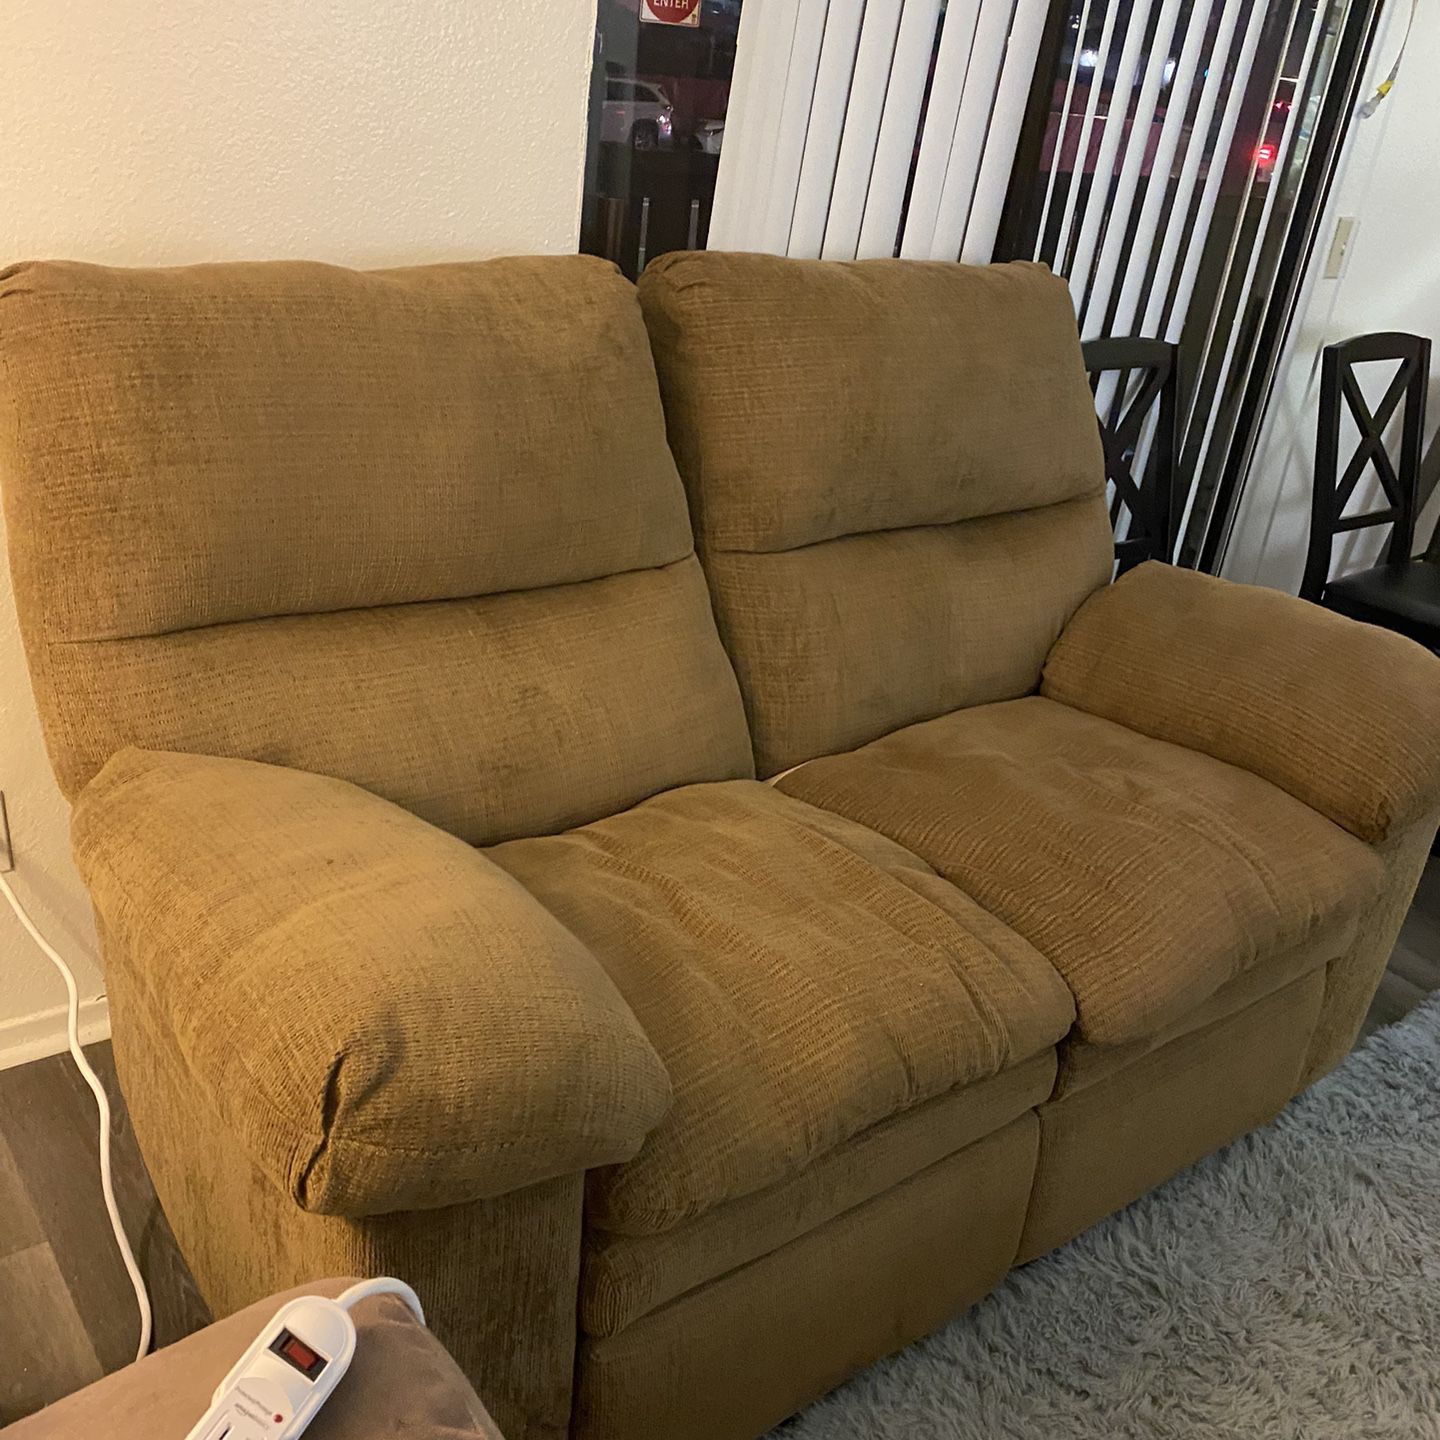 Sofa Couch (3’8 tall 5’7 long 3’1 wide)